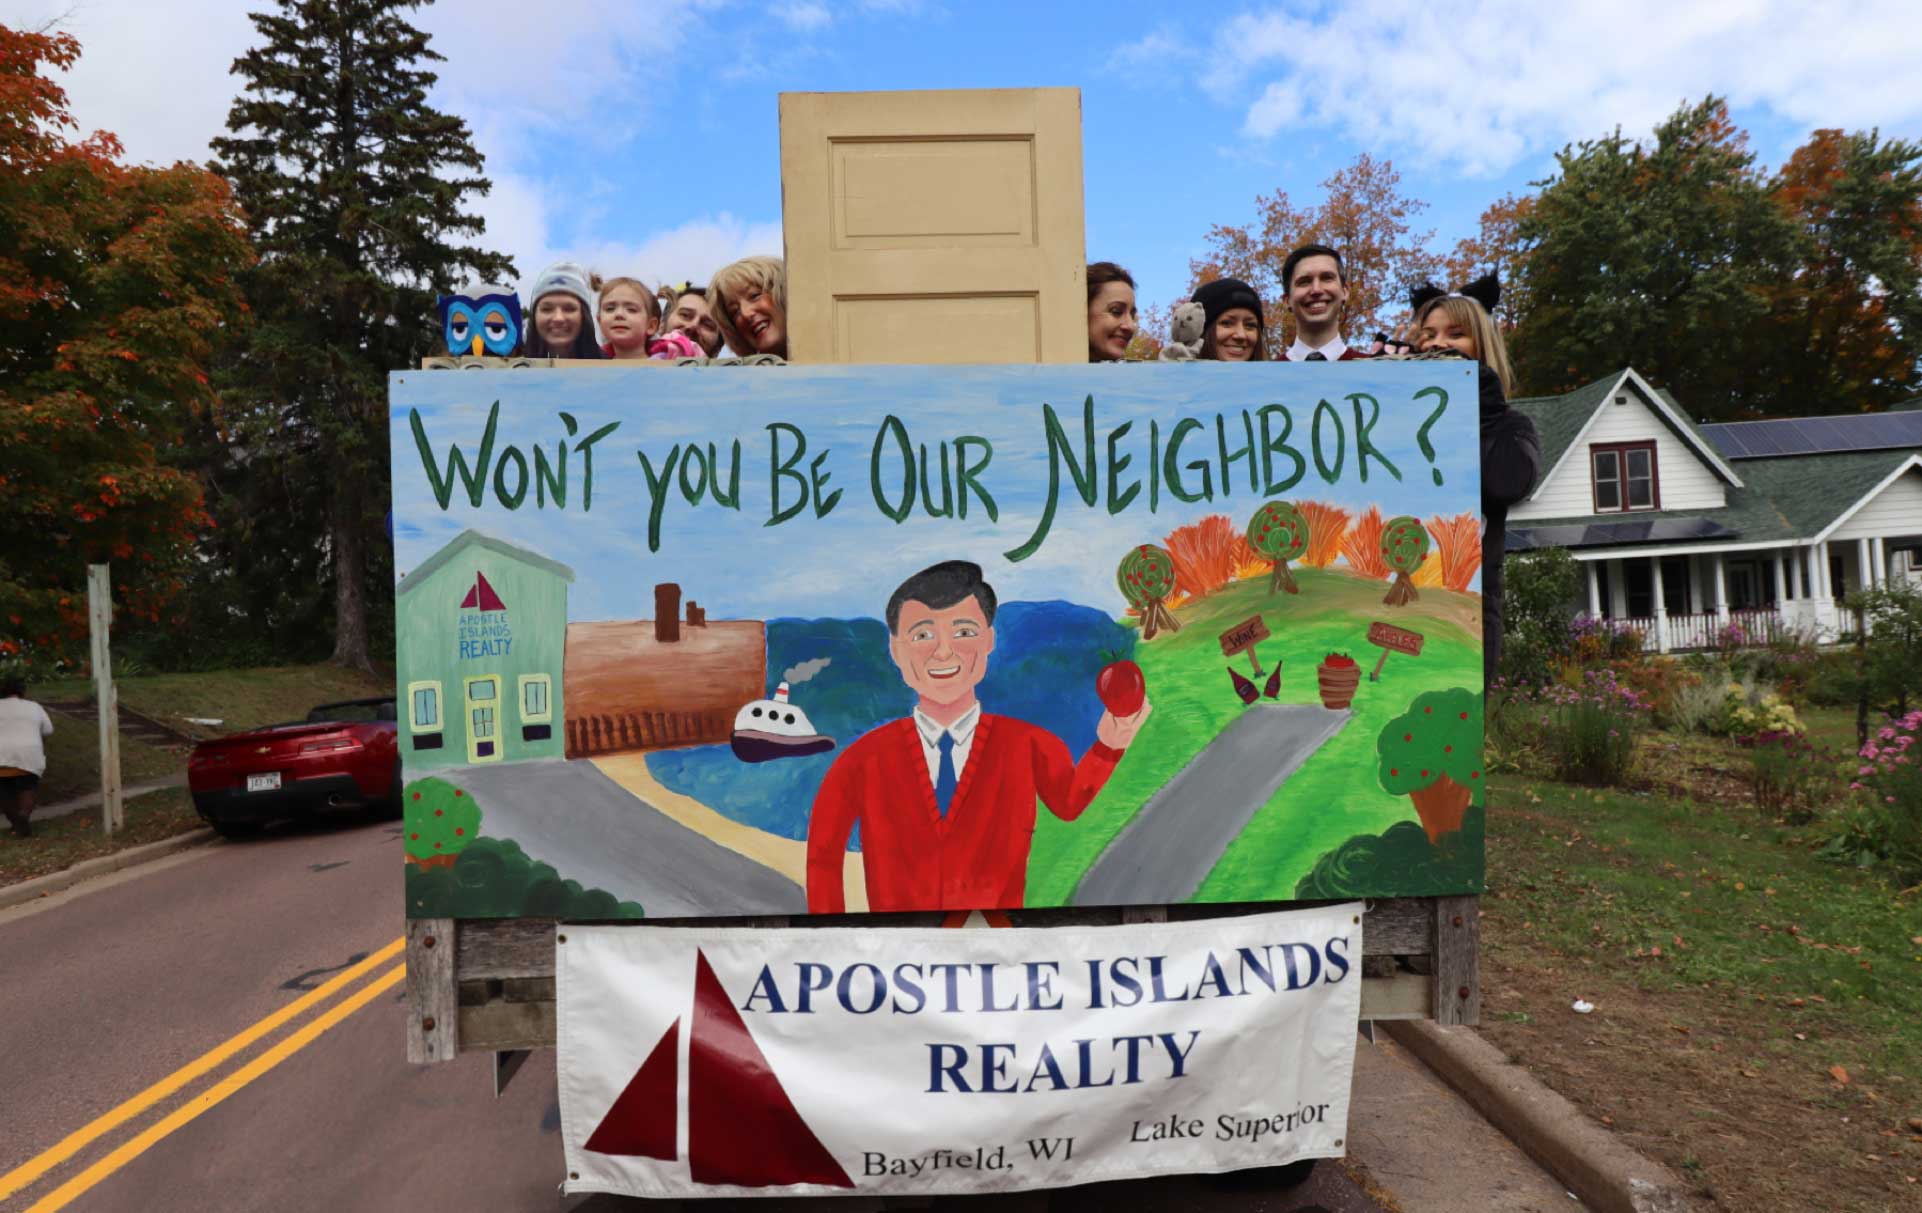 Apostle Islands Realty